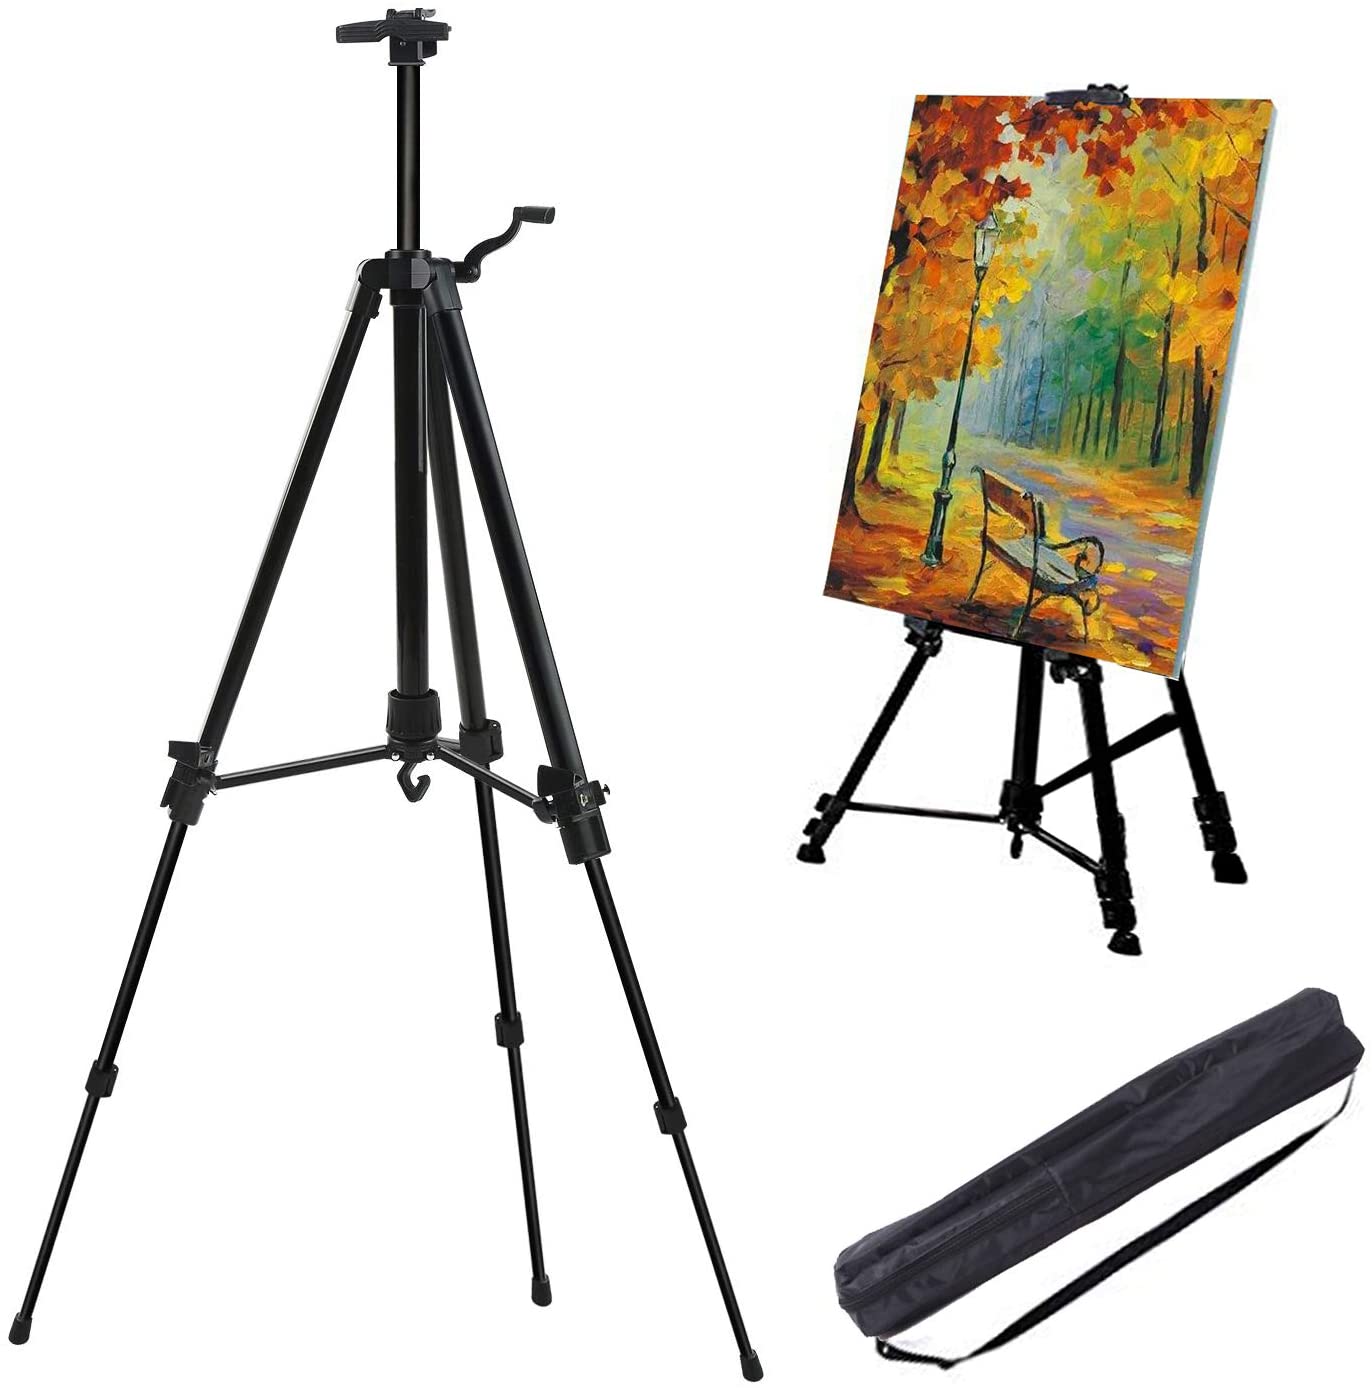 Display Easel Stand for Art Artist,Adjustable 52-162 cm,with Carry Bag, AOBETAK Aluminum Small Portable Easels for Picture/Poster/Wedding, for Artists Kids Adults Sketching Painting, Black